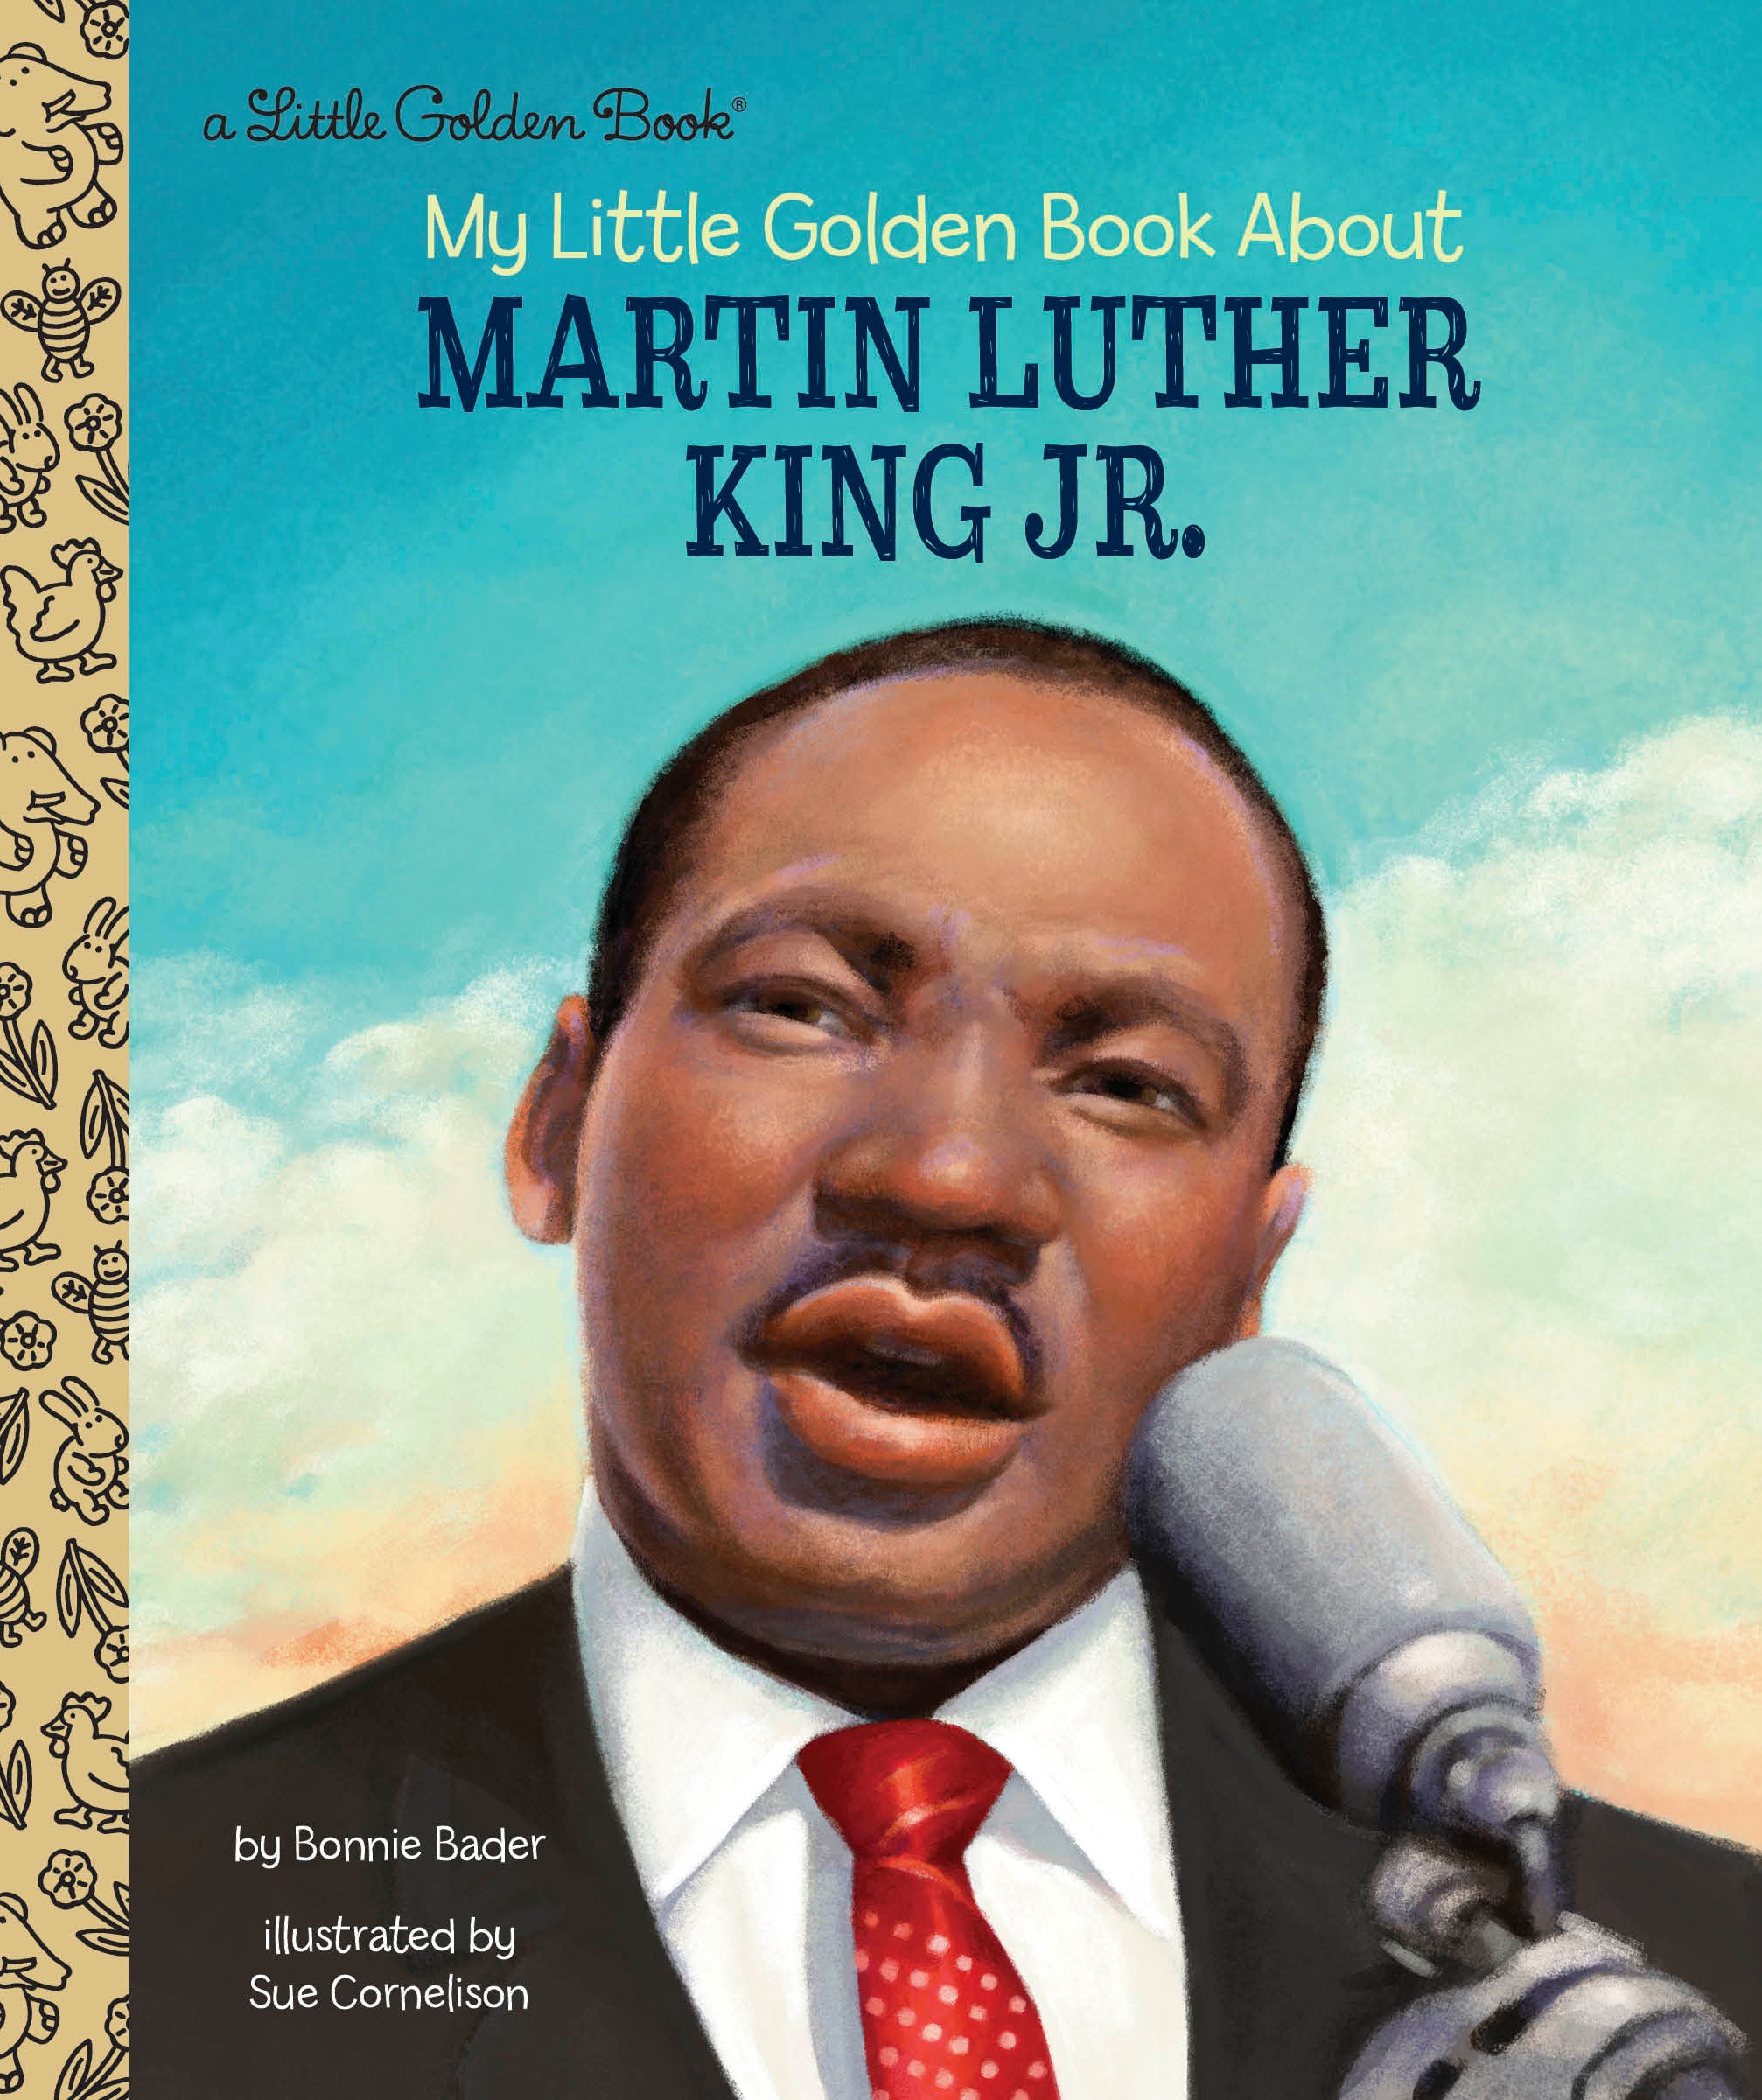 biography of martin luther king jr book